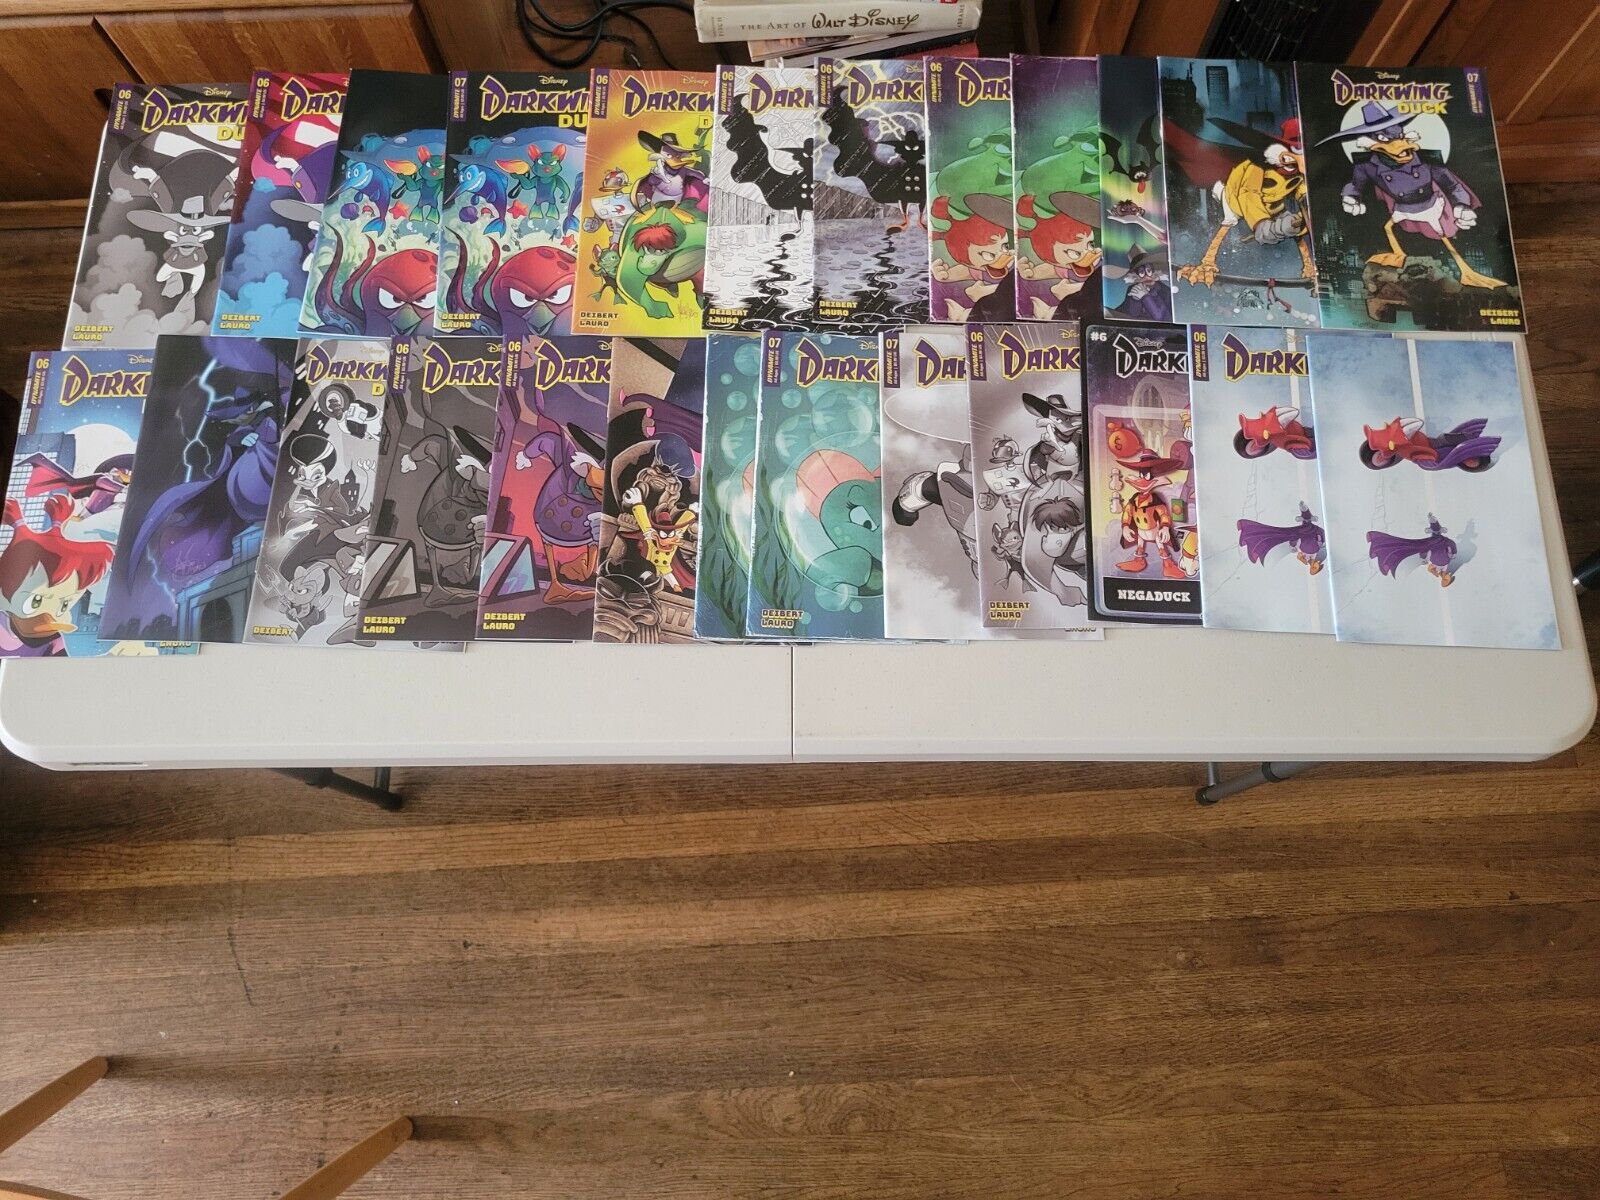 Bundle Lot Of 25 Dynamite Darkwing Duck Comics #6 & 7( Some Textless Covers)